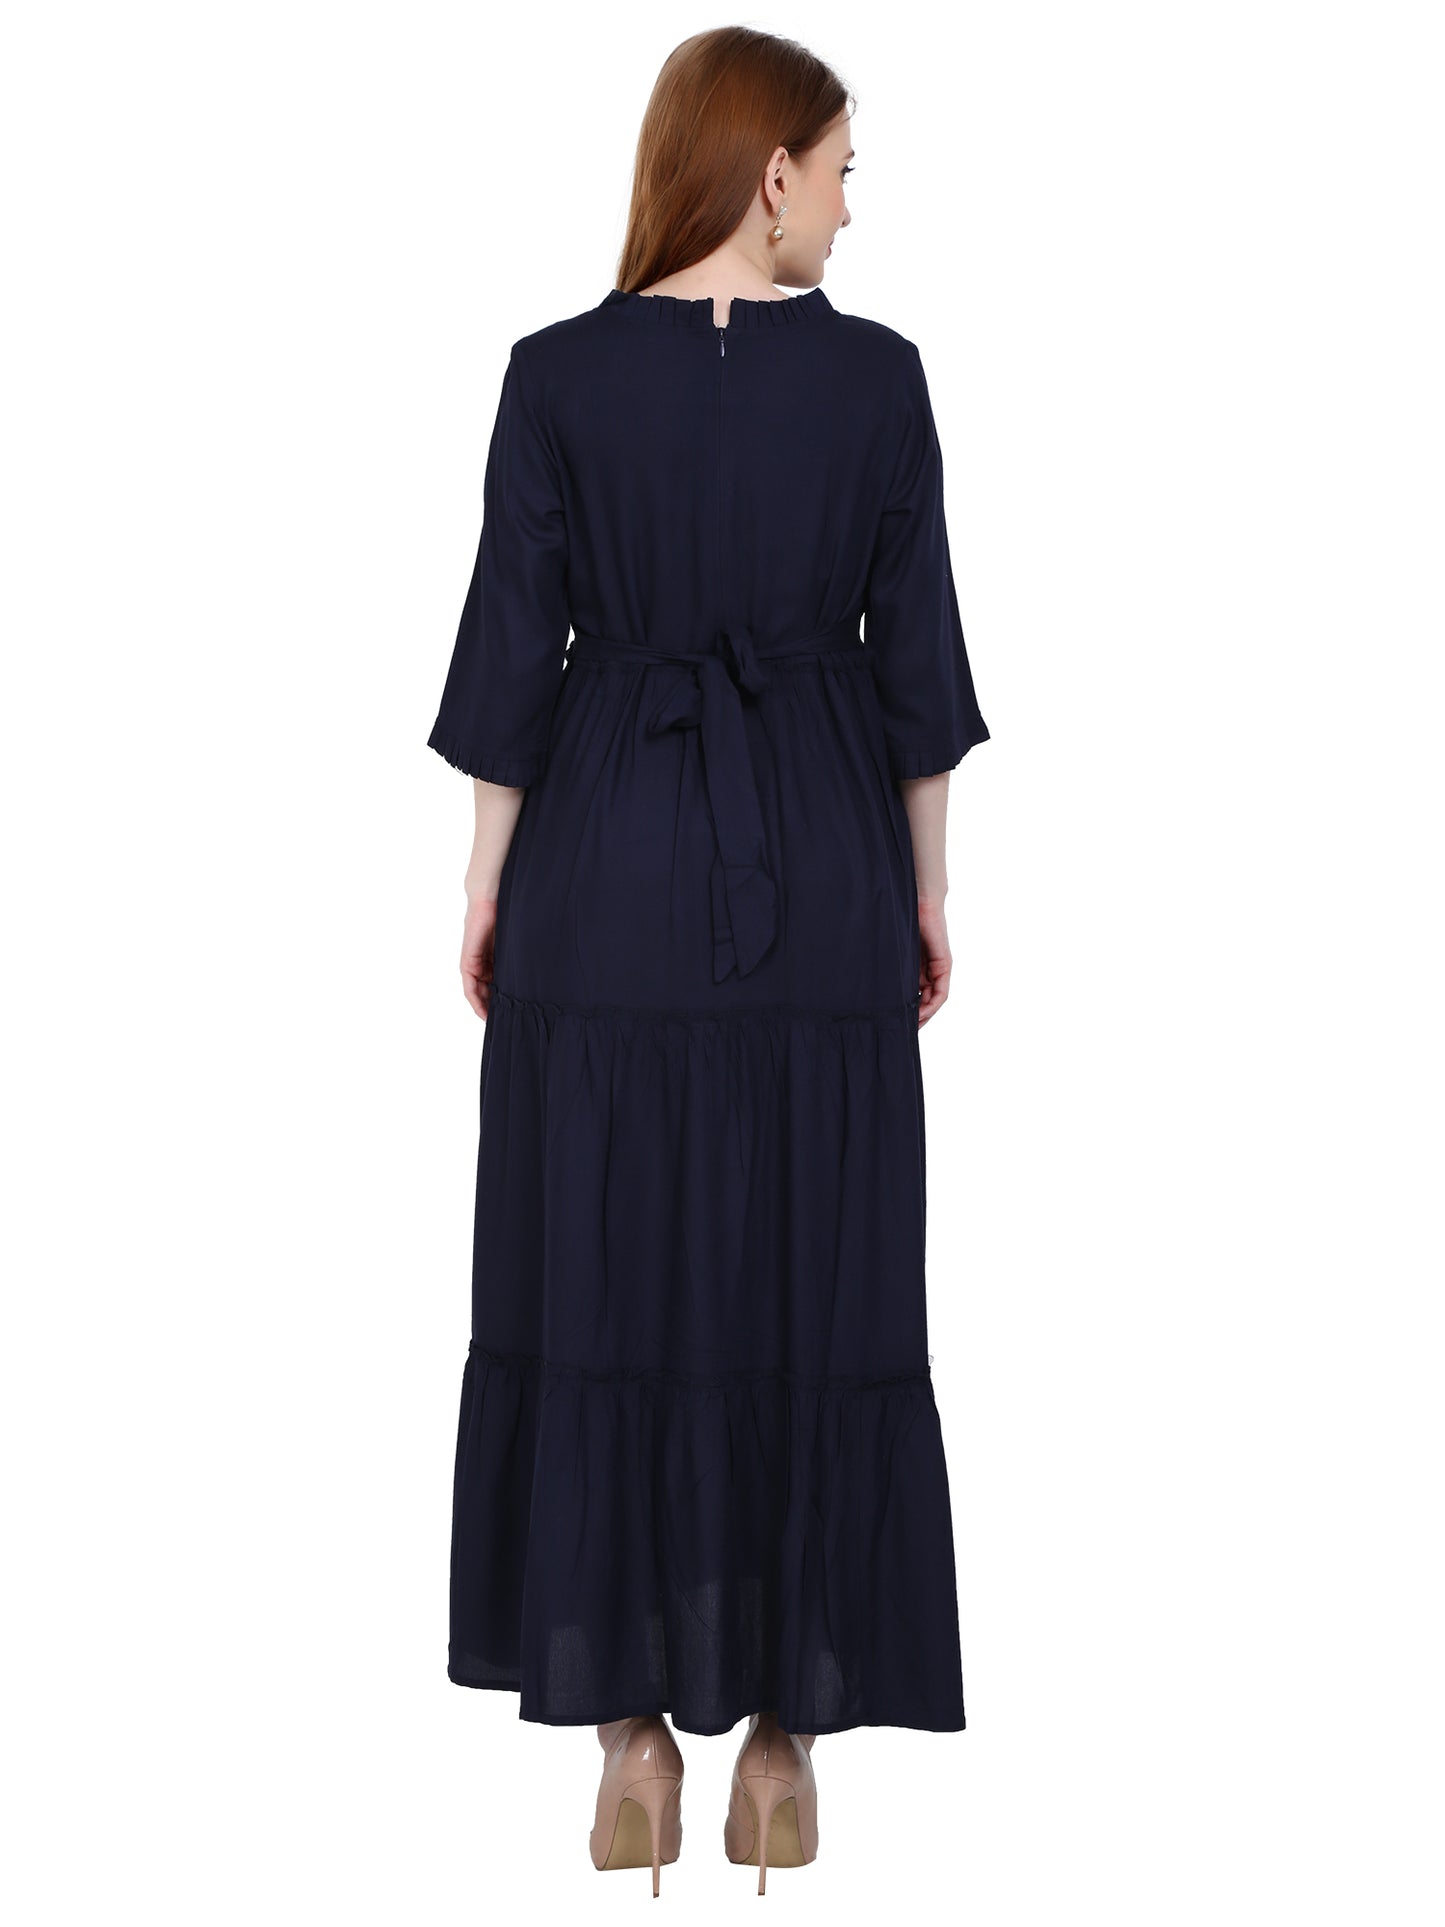 Maternity and Feeding Dress | Rayon Navy Blue Color | With Cotton Lining